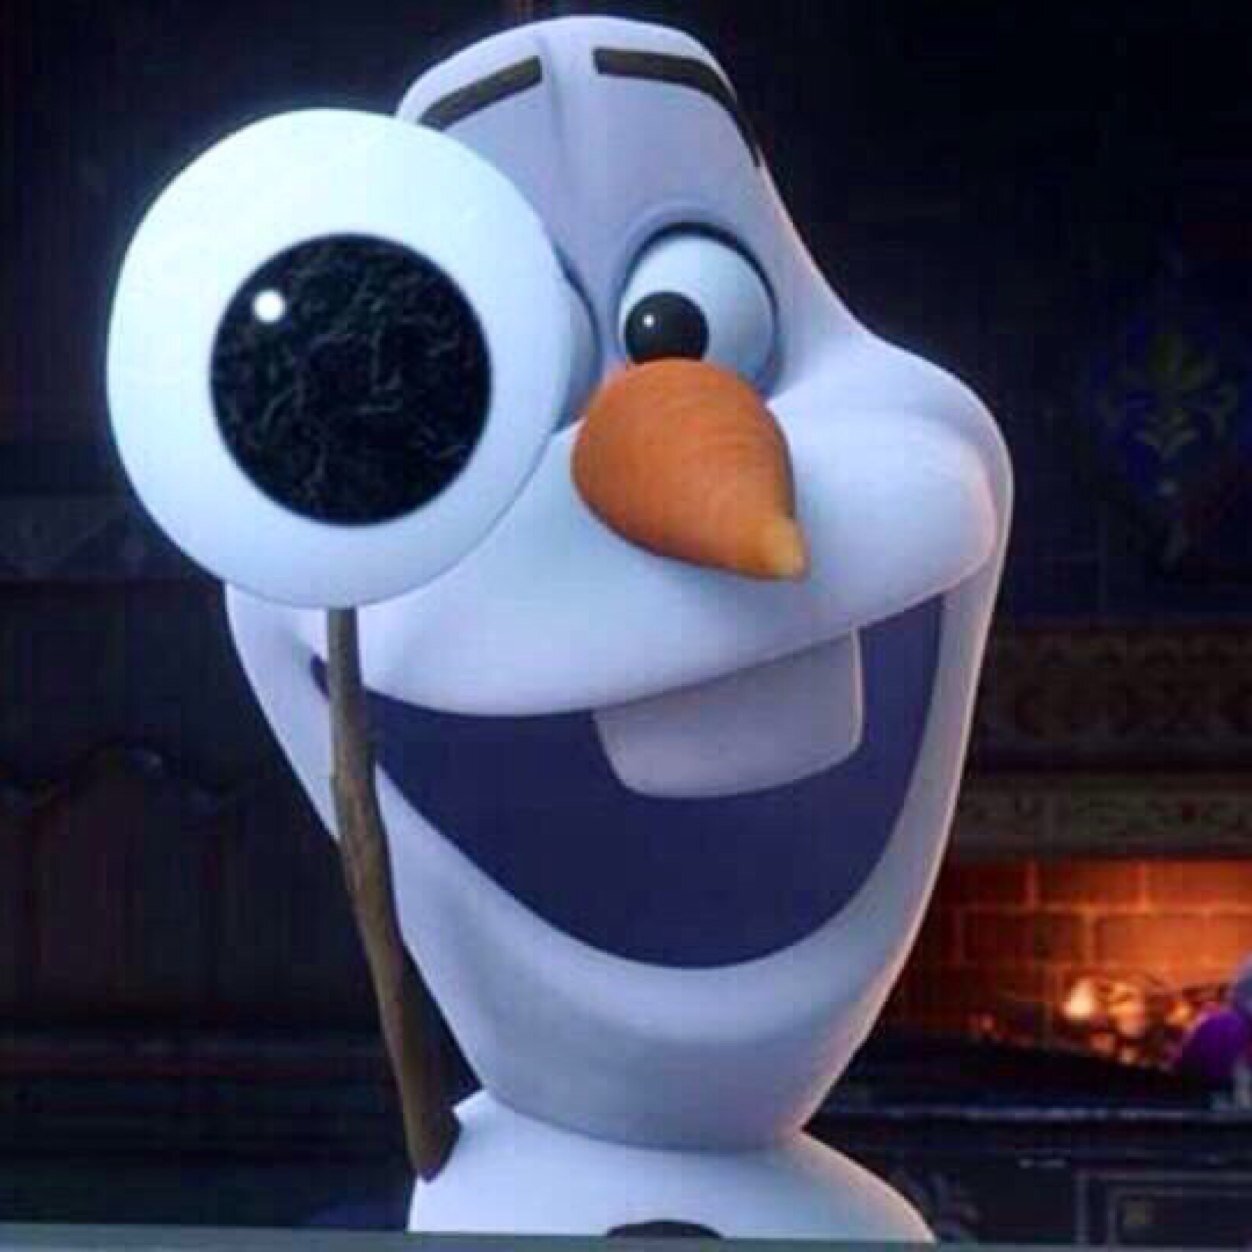 tbh im the real star of Frozen. ❄️ original Olaf